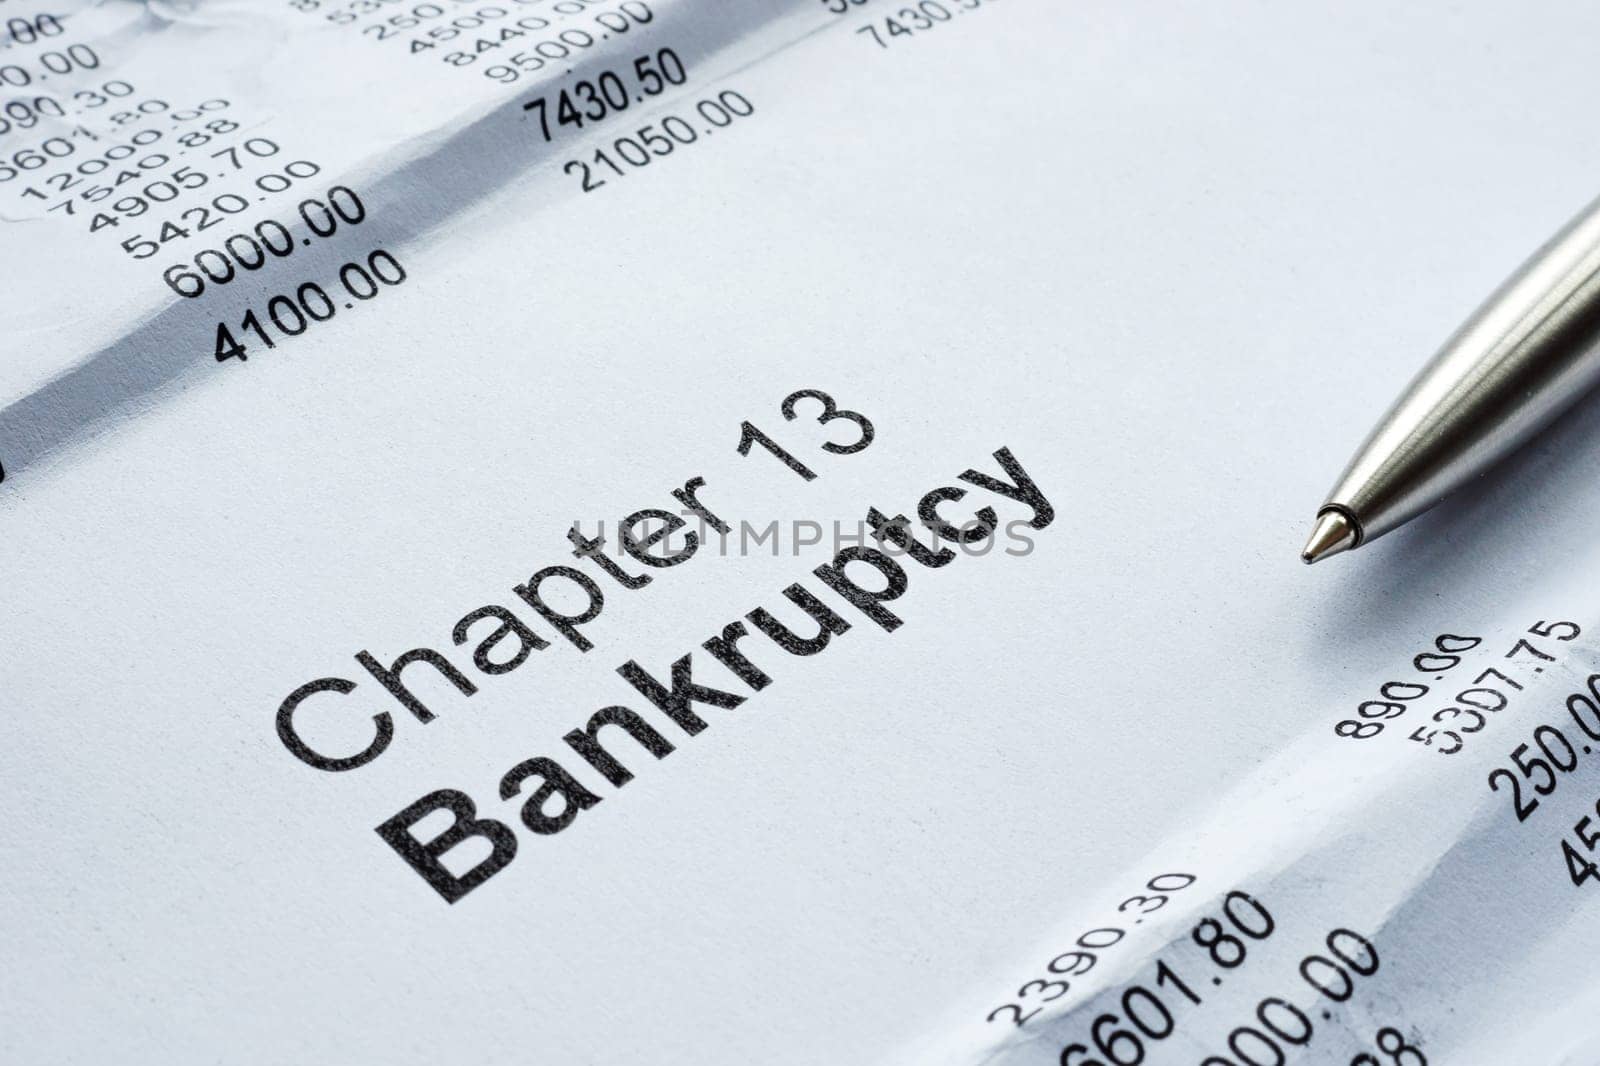 Chapter 13 bankruptcy and financial report sheet.